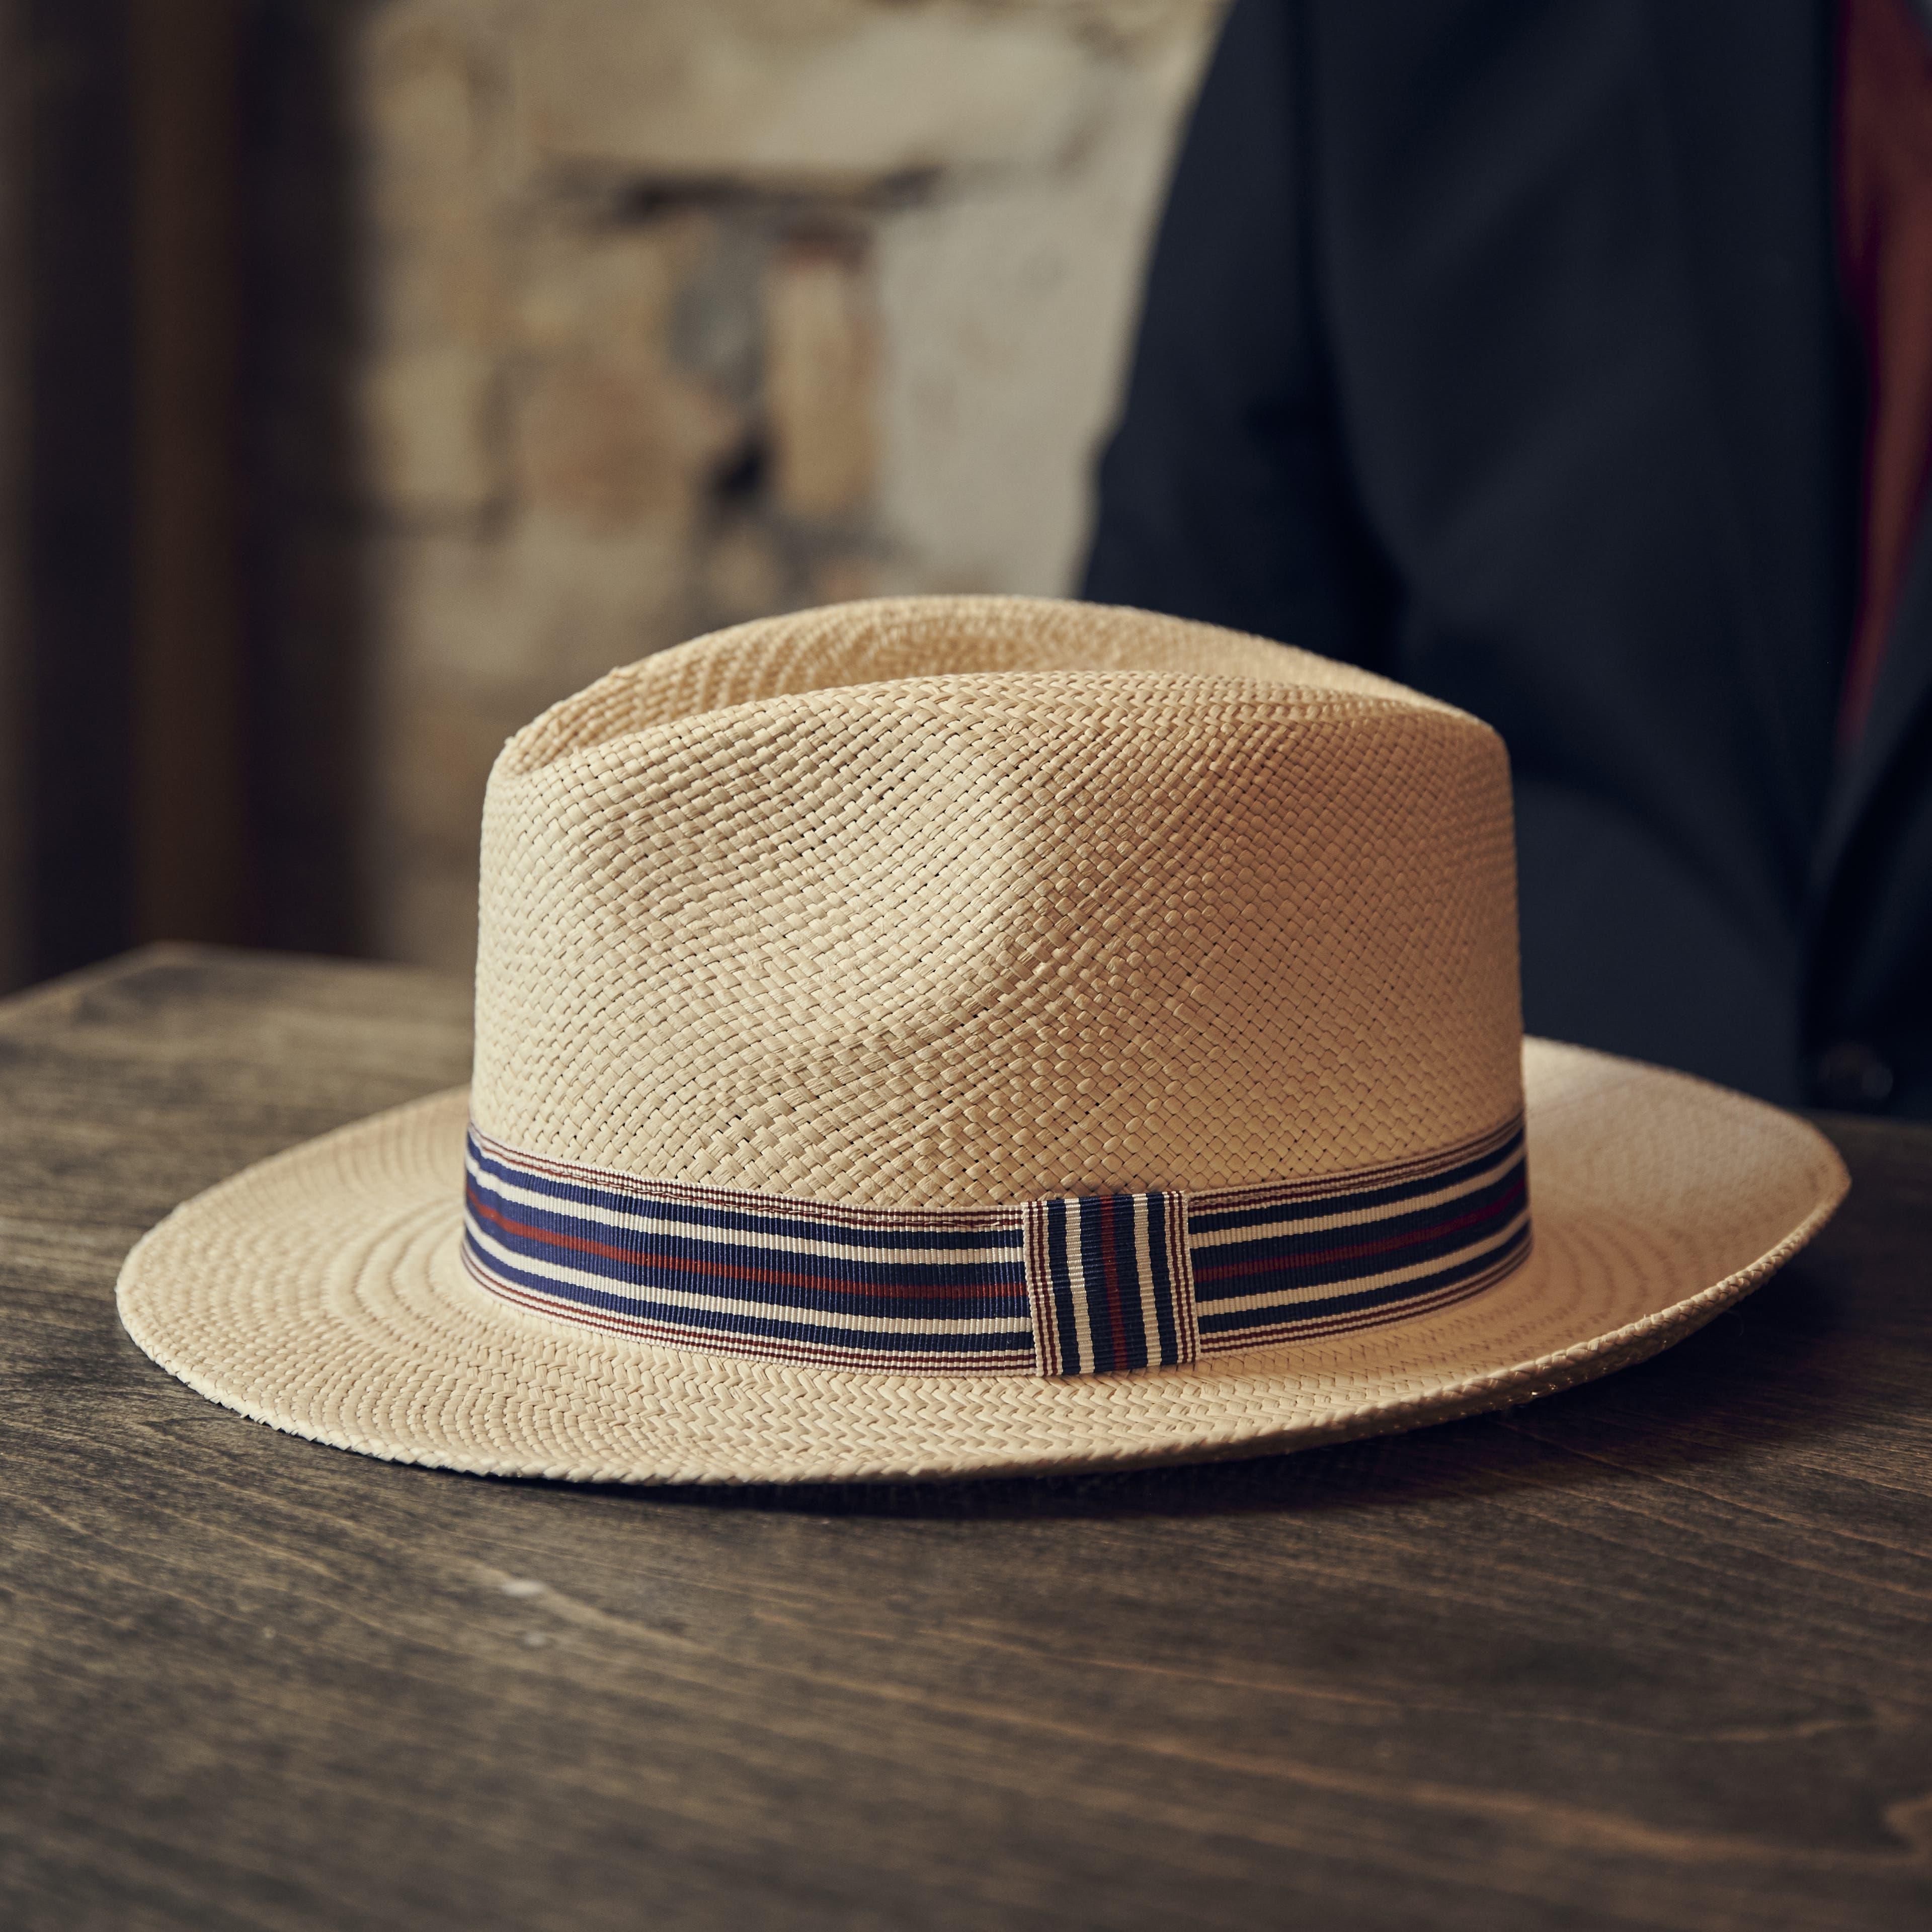 NATURAL-COLOURED MODA PANAMA HAT WITH STRIPED BAND